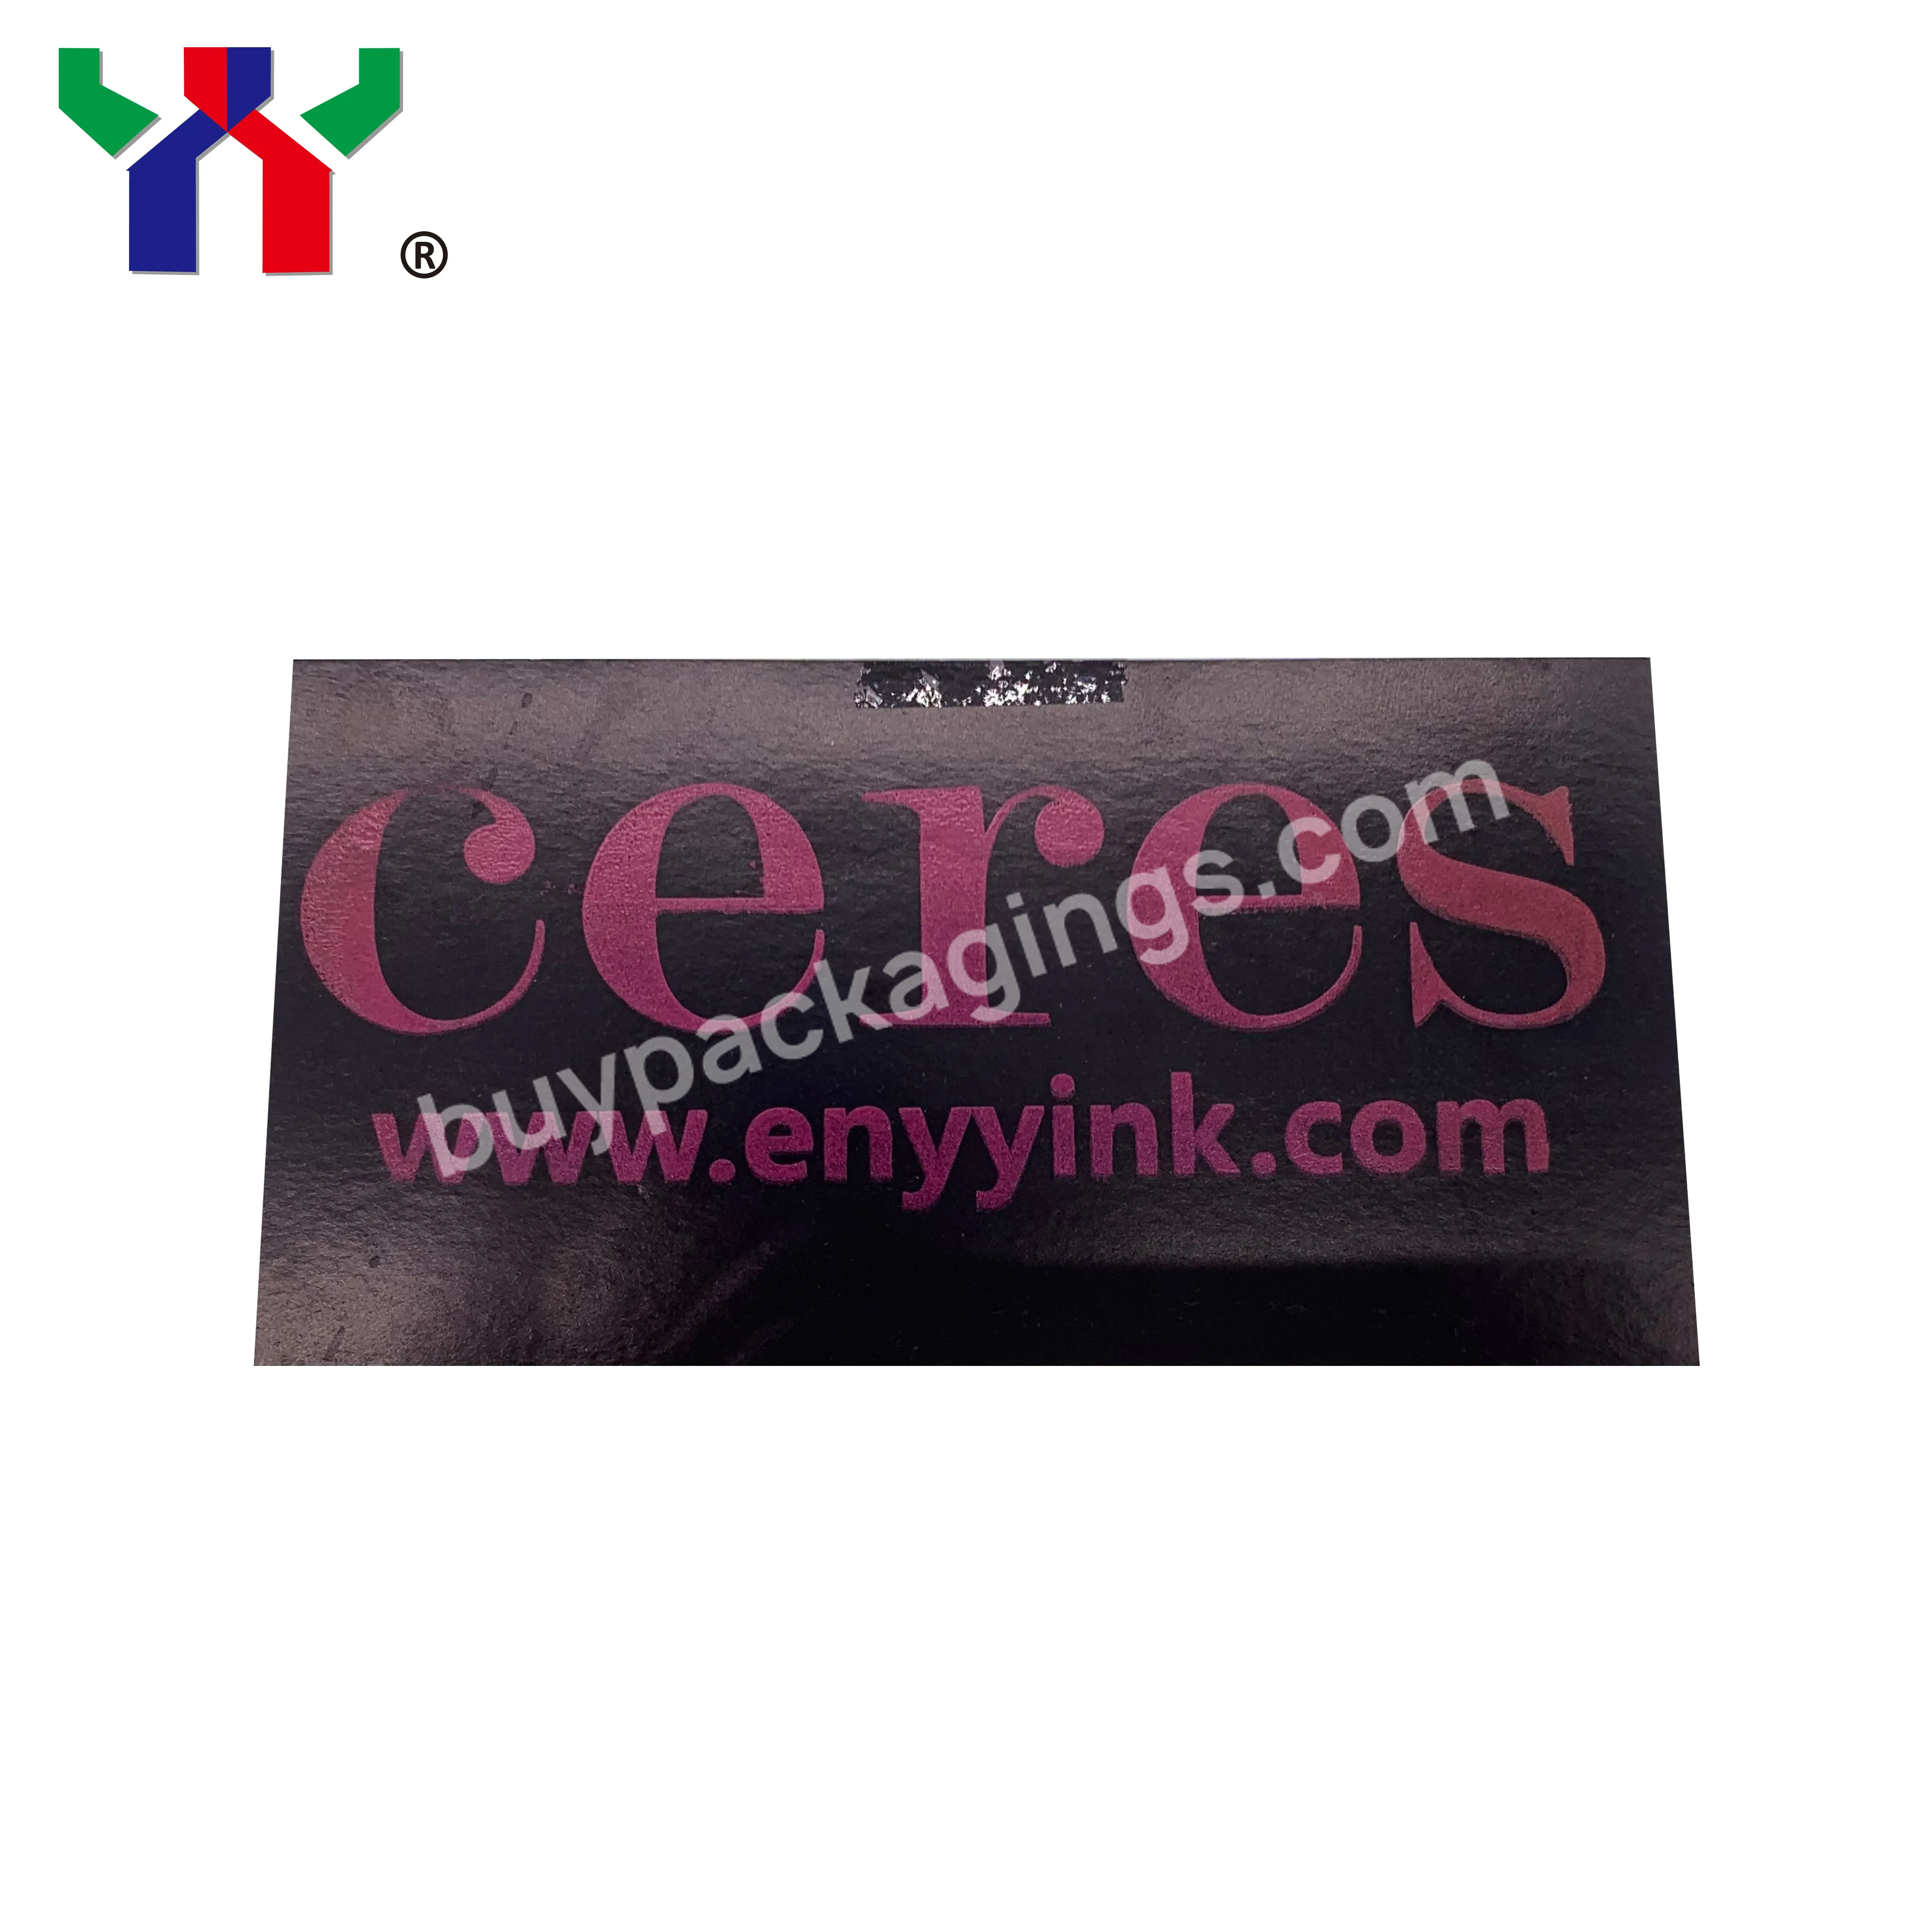 Ceres Screen Printing Optical Variable Ink Yy9 Purple Red To Greren,100 G/bottle - Buy Optical Variable Ink,Screen Printing Optical Variable Ink,Screen Printing Ink.